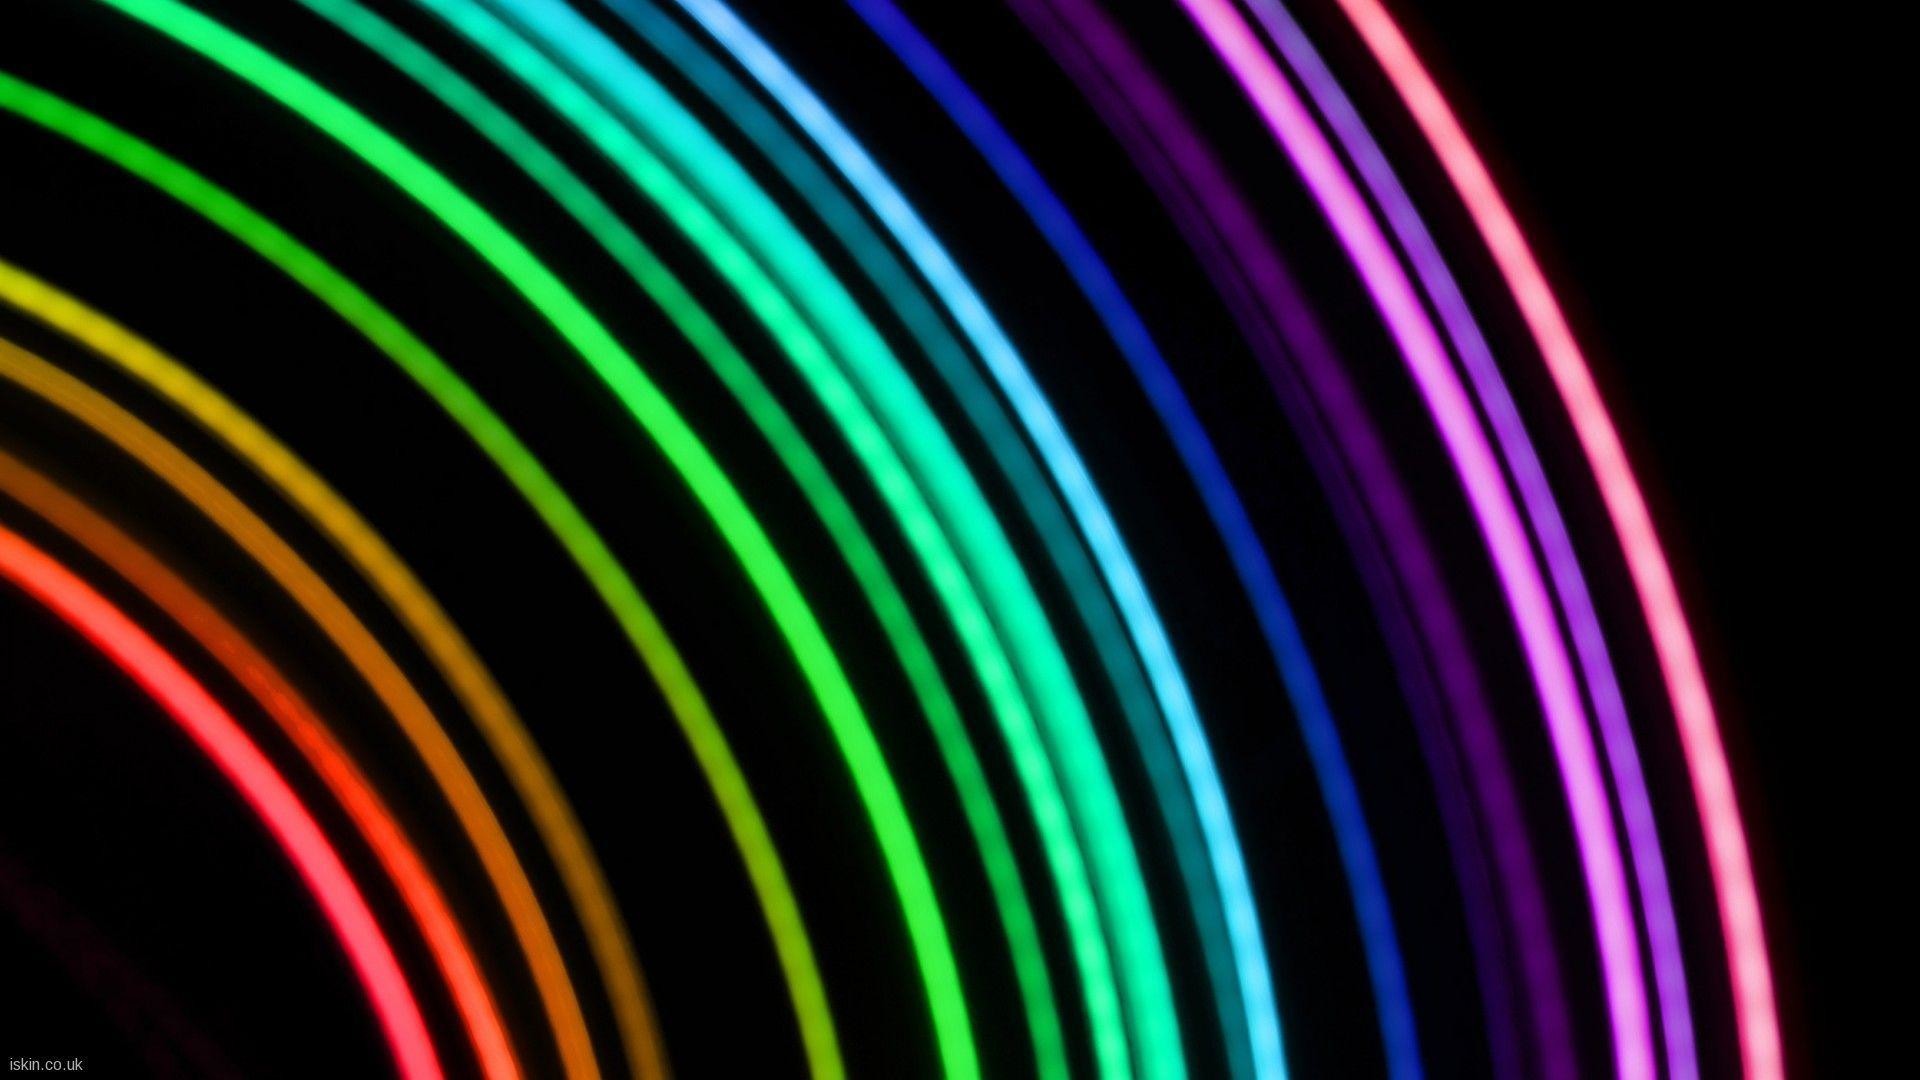 1920x1080 Wallpapers For > Cool Bright Neon Backgrounds